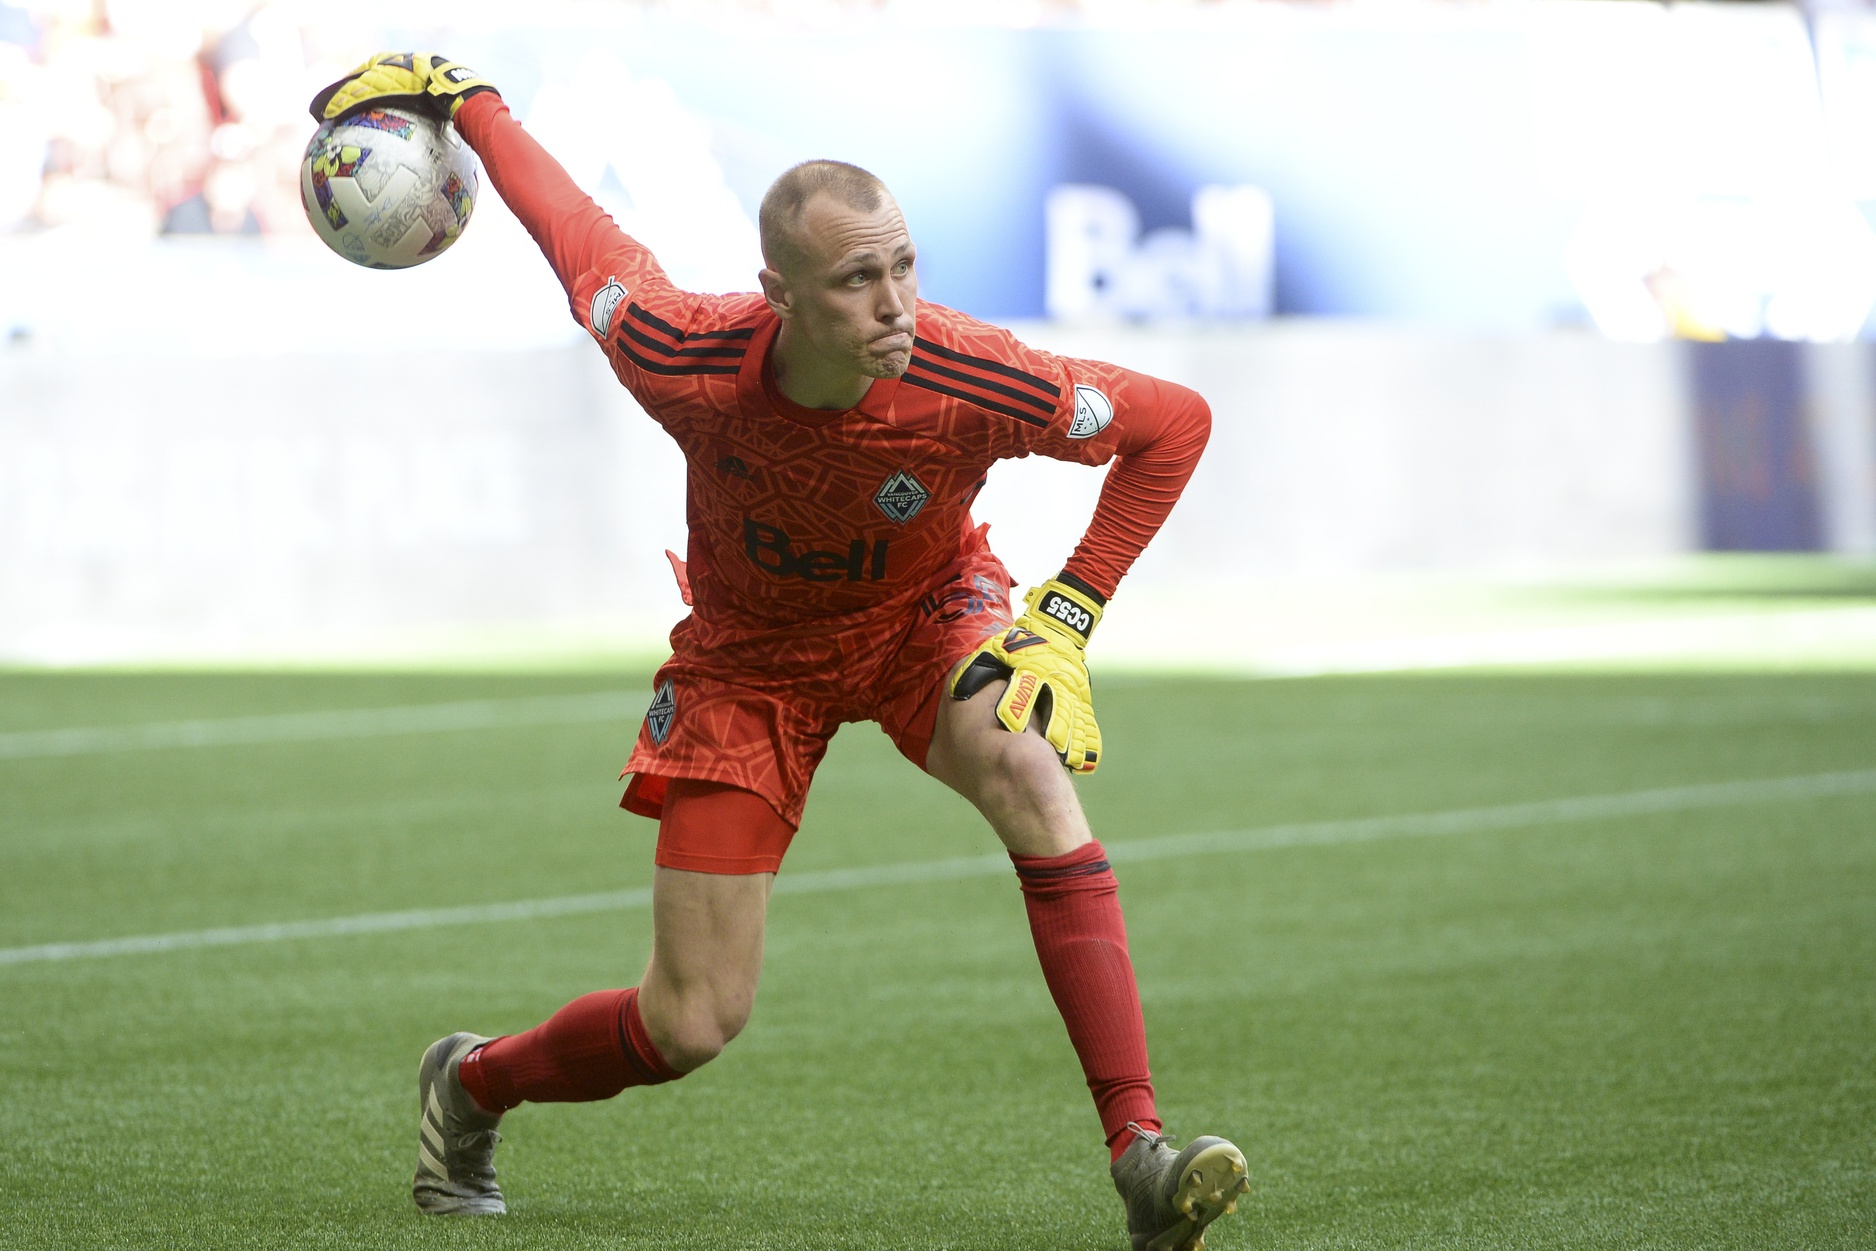 Jun 26, 2022; Vancouver, British Columbia, CAN; Vancouver Whitecaps goaltender Cody Cropper (55) throws in the ball against the New England Revolution during the first half at BC Place. Mandatory Credit: Anne-Marie Sorvin-USA TODAY Sports